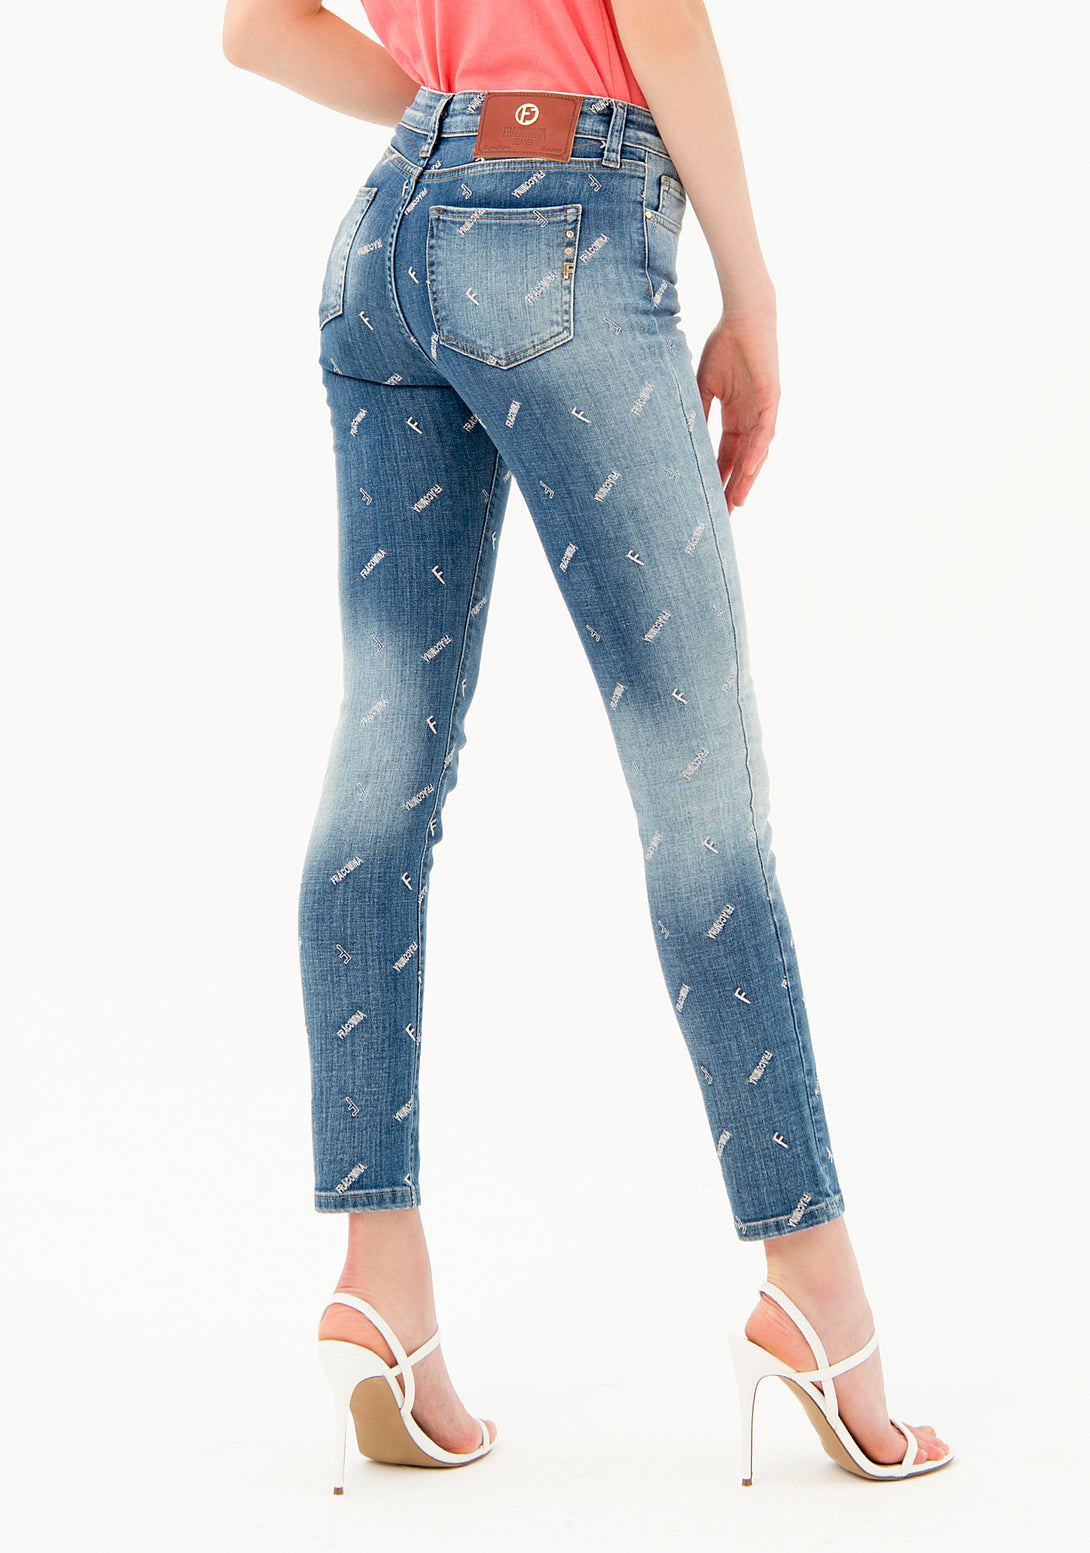 Jeans skinny fit made in stretch denim with middle wash and logo print